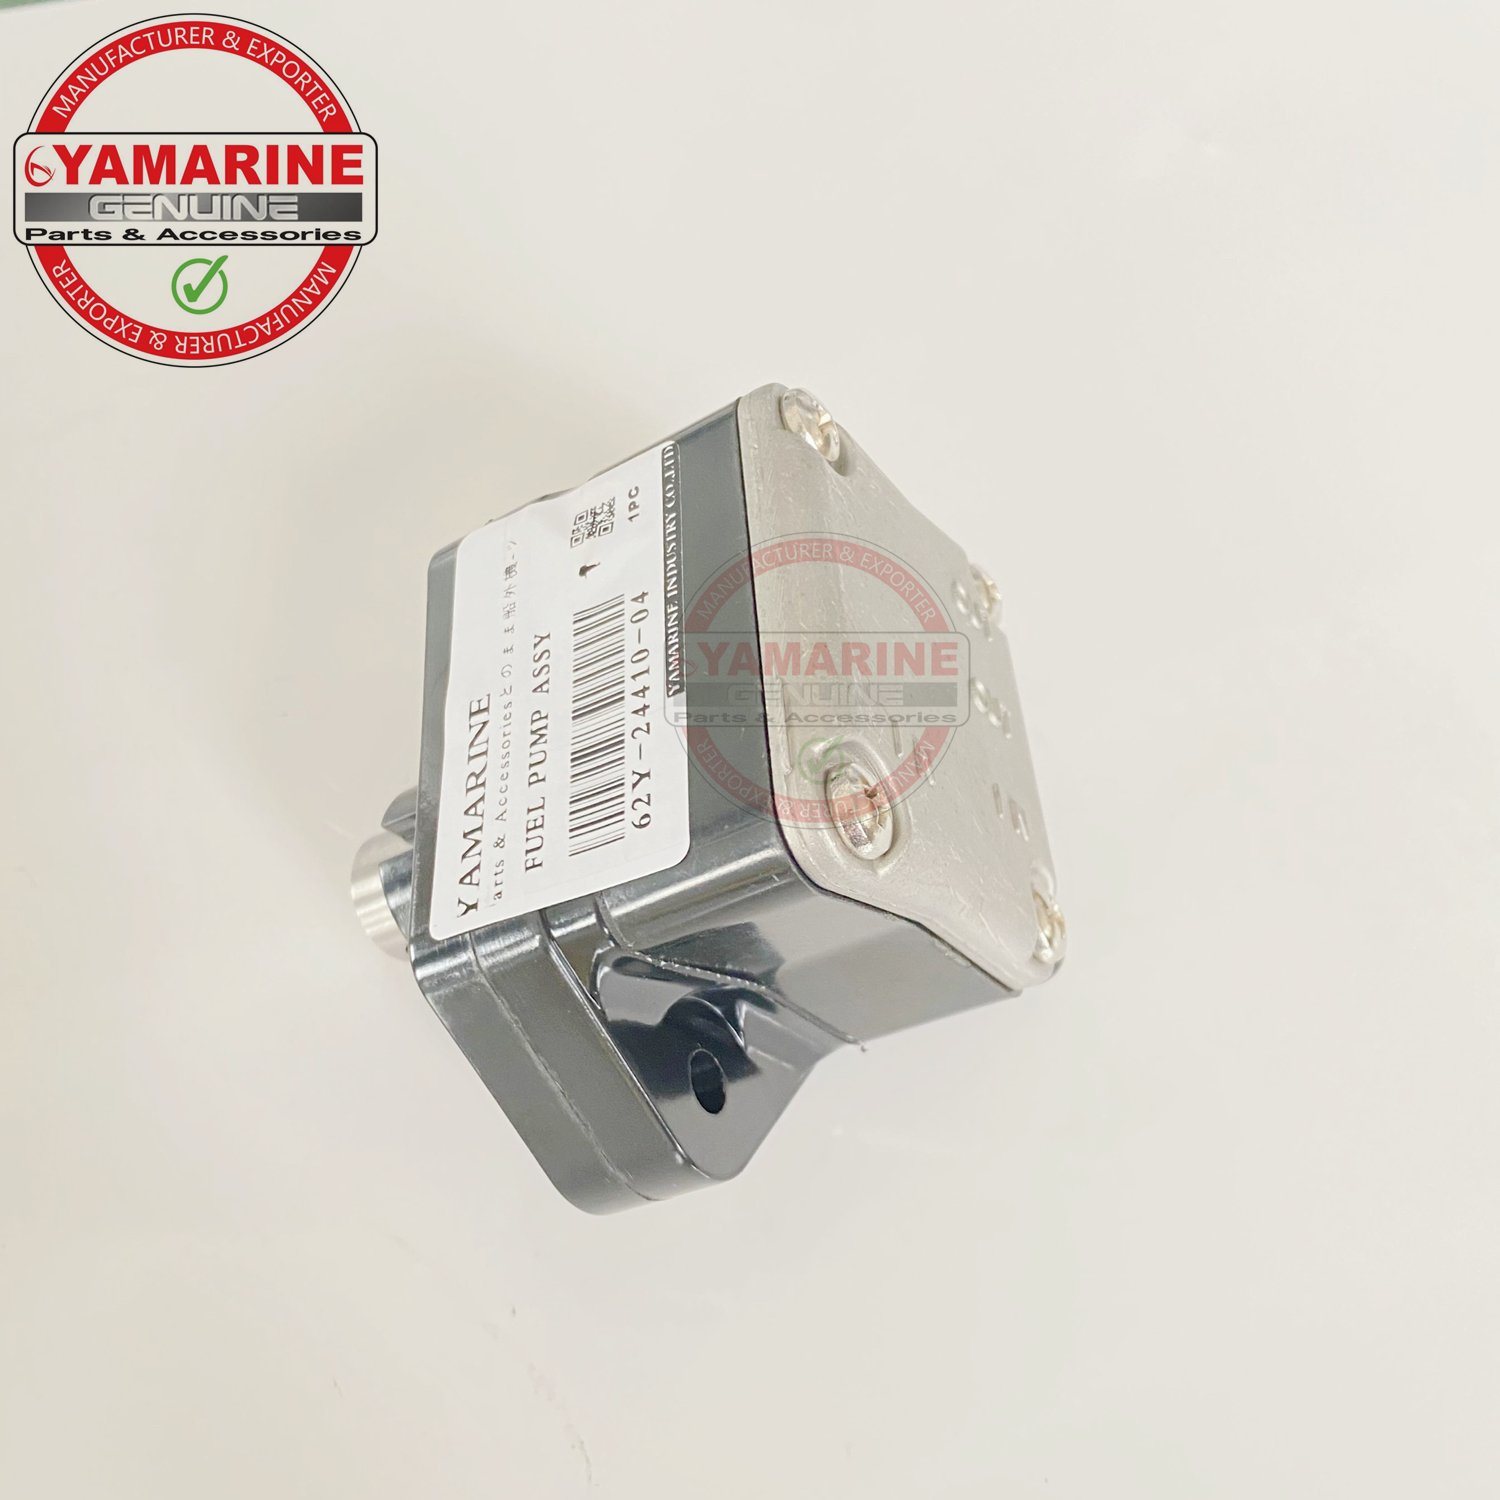 YAMAHA 62y-24410-04 Outboard Fuel Pump Fit for YAMAHA Four Stroke F20A, F20d, F25A, FT25b, F25D, FT25D, FT25f, F30A, F60A, F40b, F40c, F50A, FT50b,